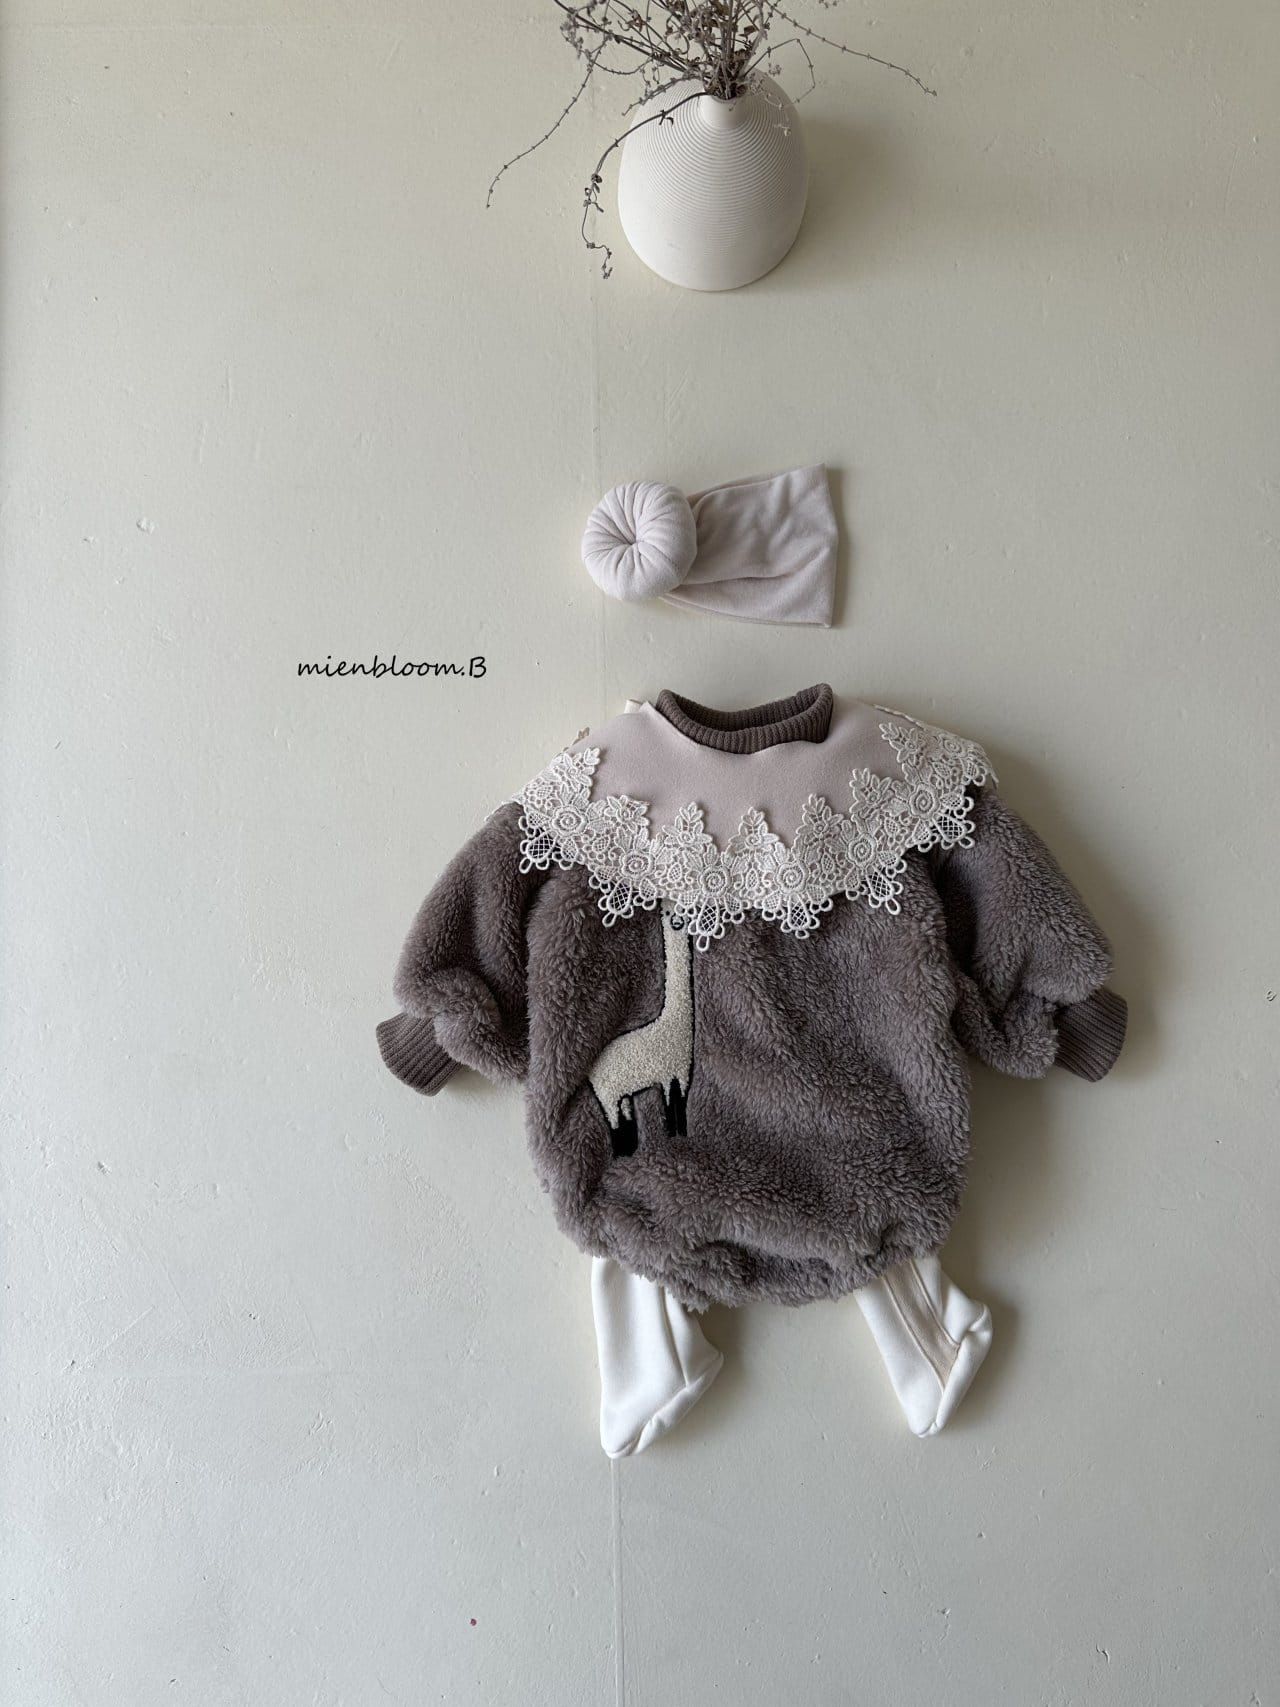 Mienbloom B - Korean Baby Fashion - #babyoutfit - Lama Bboggle Body Suit - 9